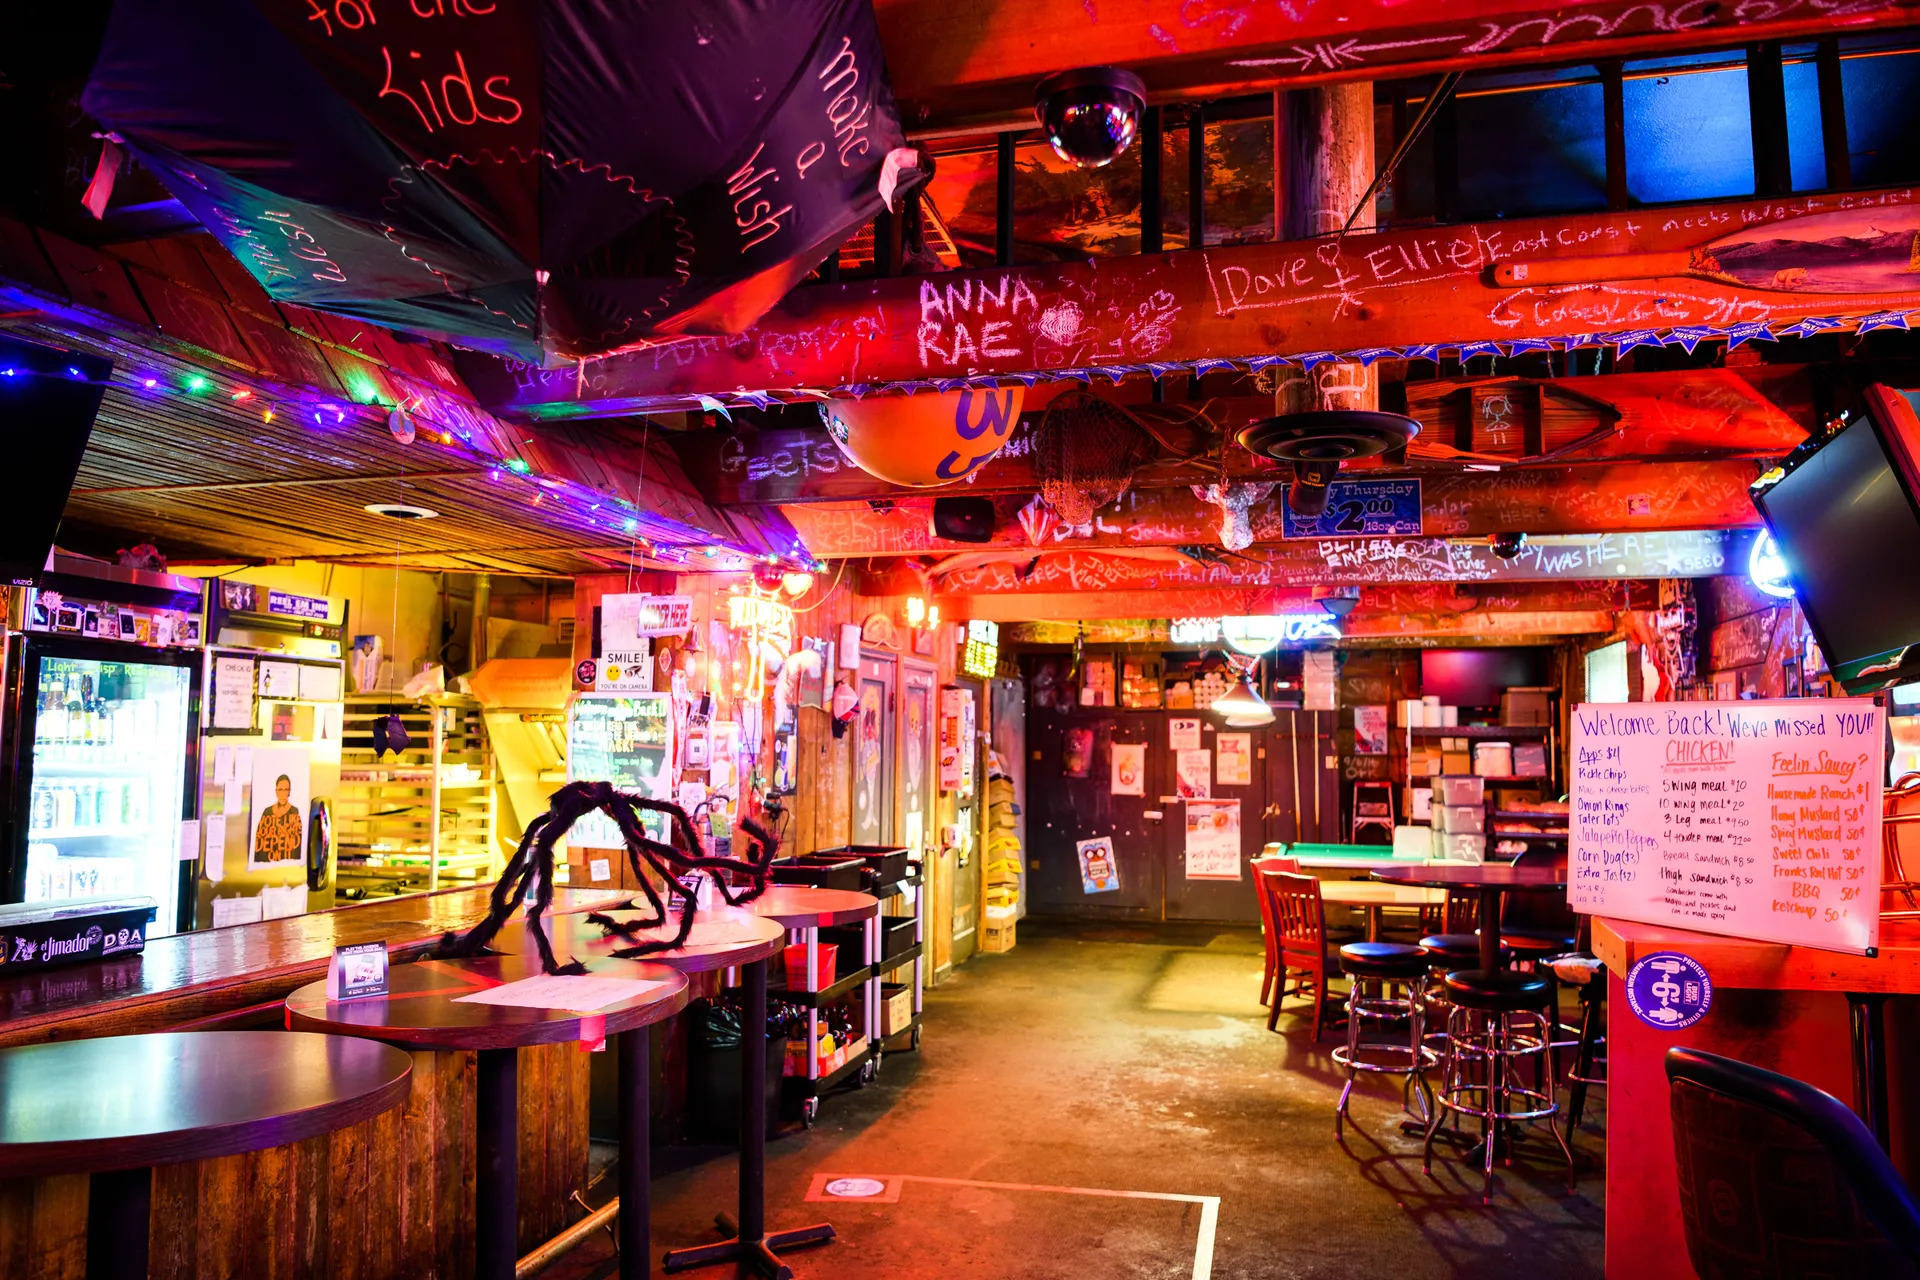 The interior of Reel M Inn, a cozy and dark dive bar.